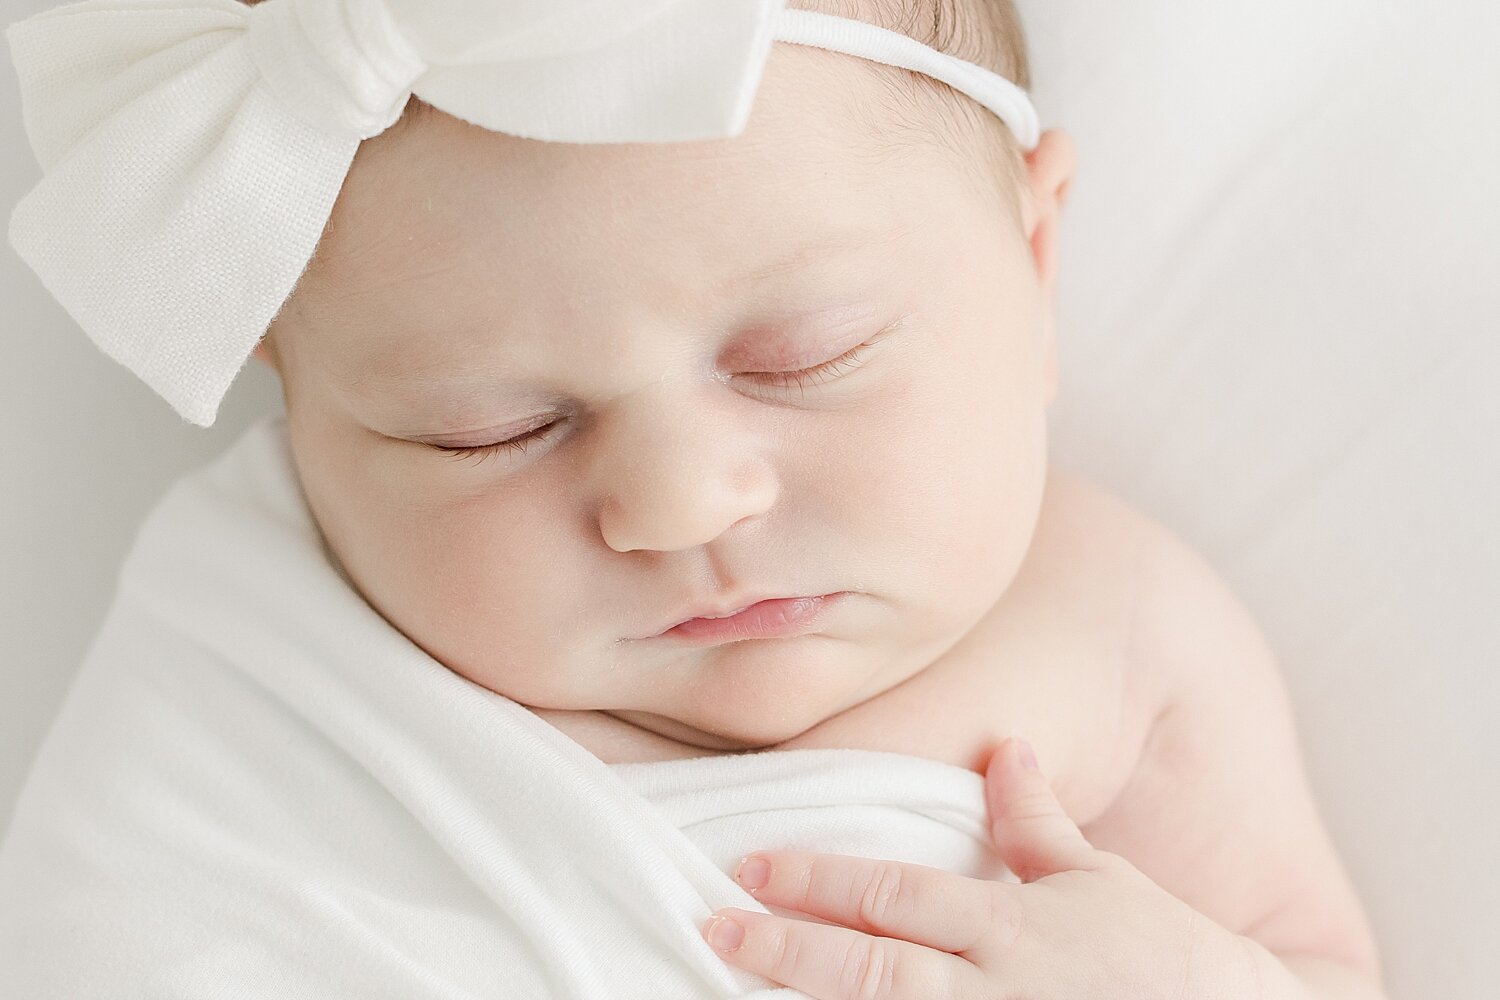 Baby girl swaddled in white with a white headband for newborn photos with Kristin Wood Photography in Westport, CT. 